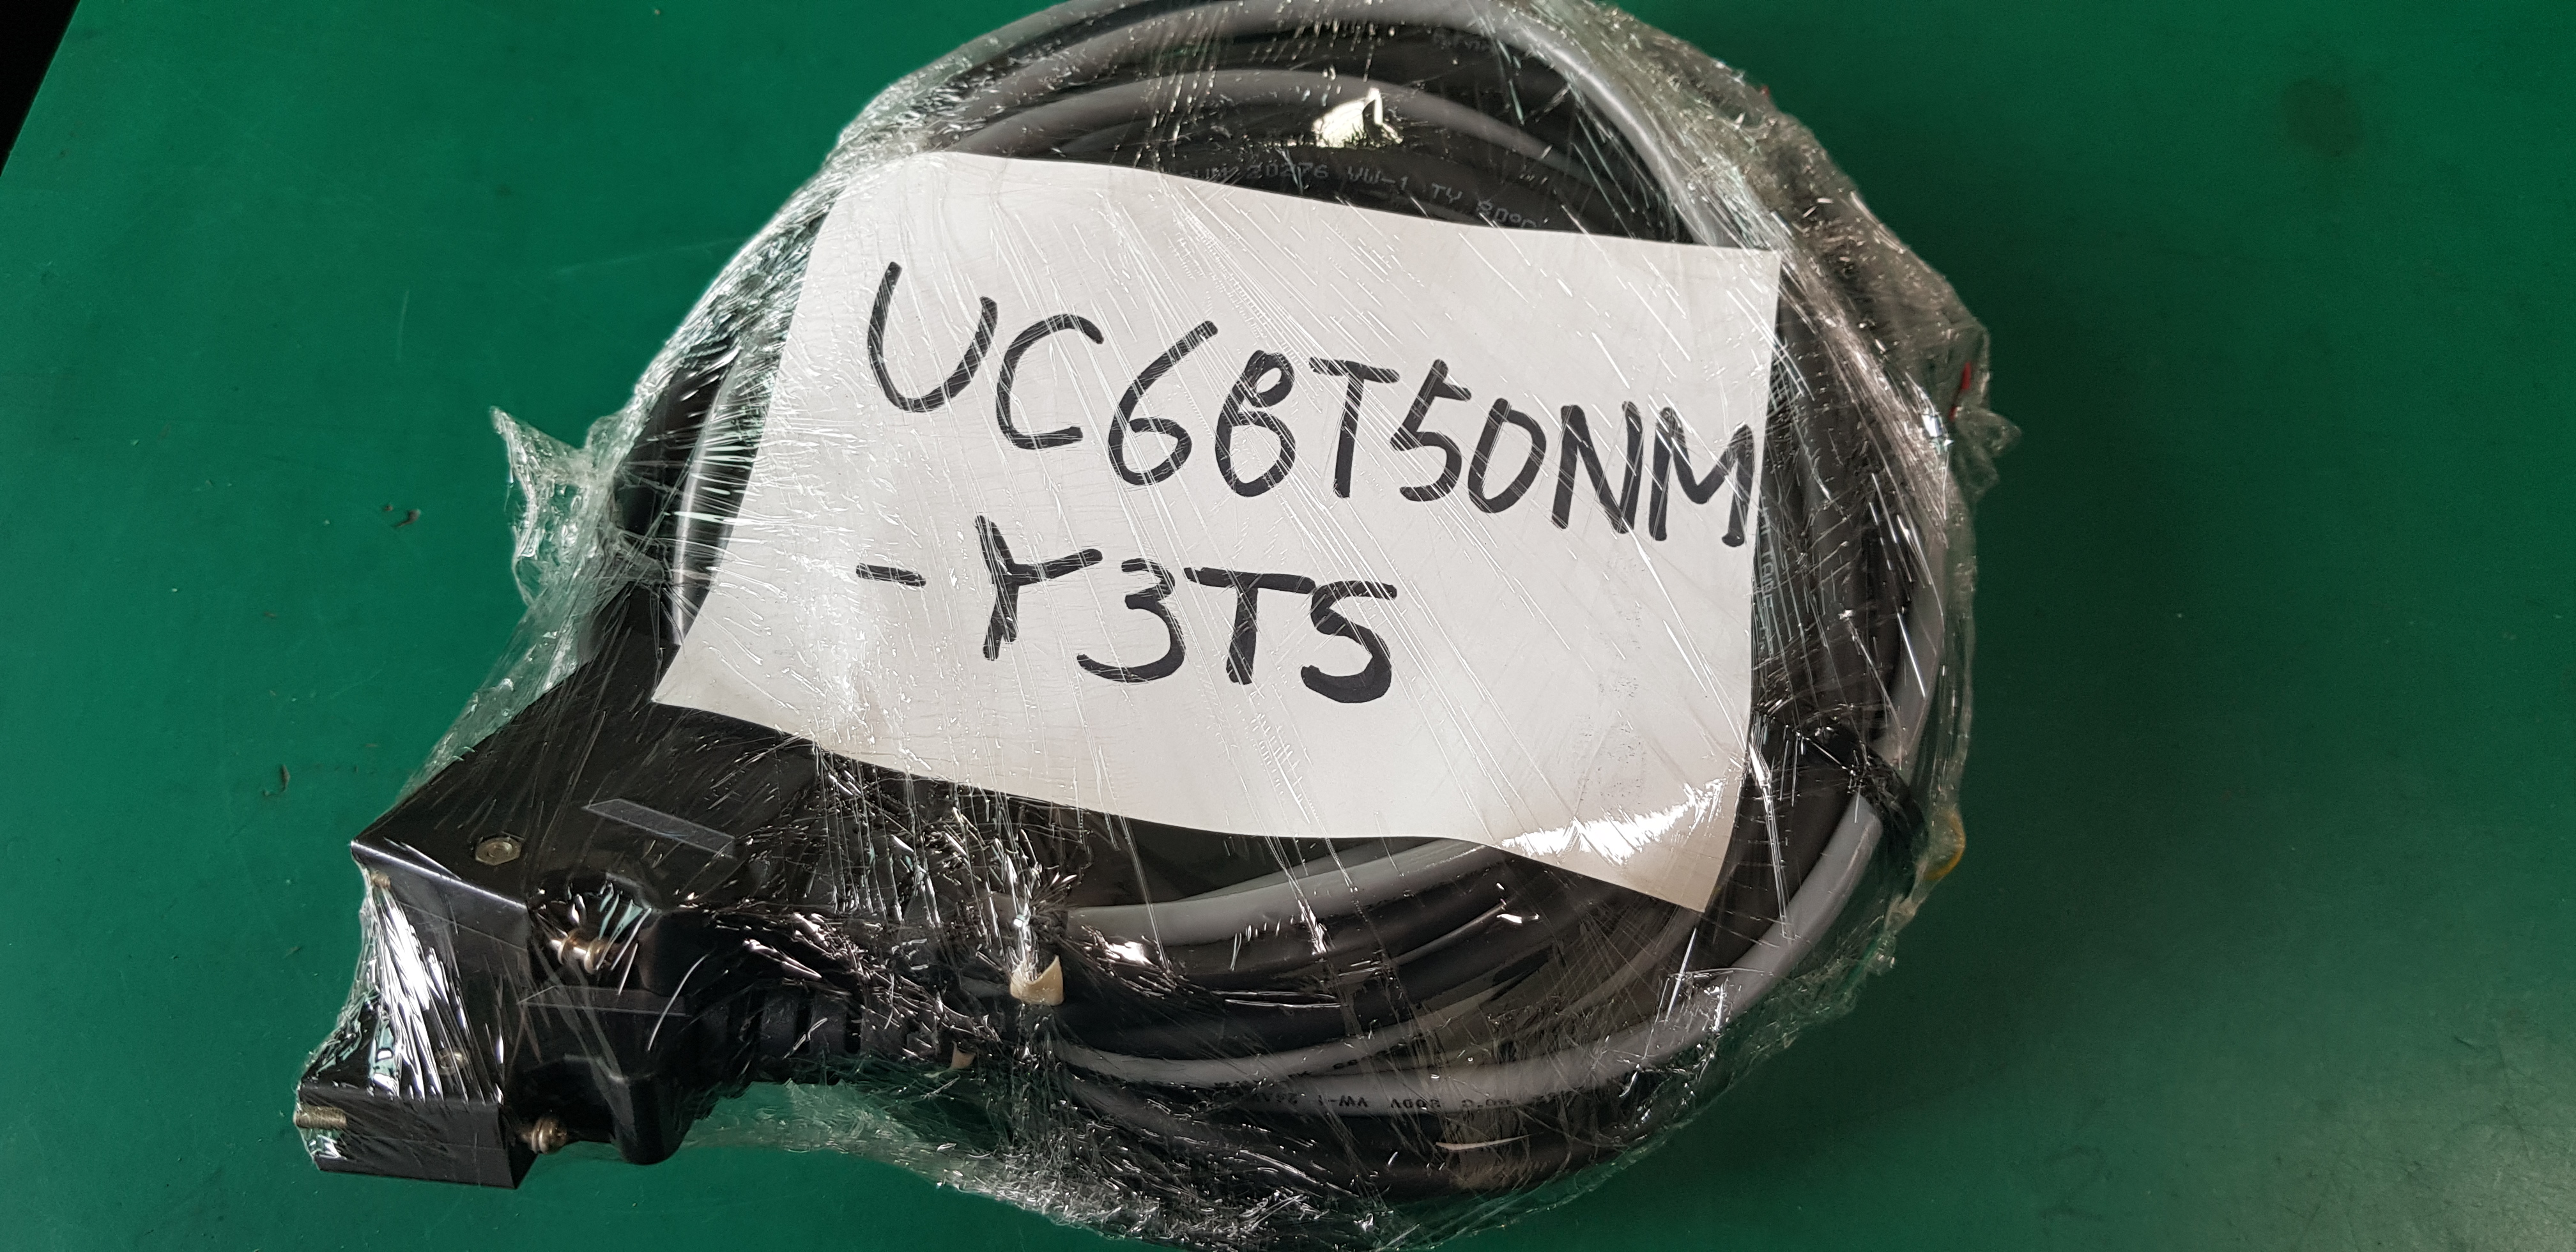 INTERFACE CABLE UC68T50NM-Y3TS (중고)